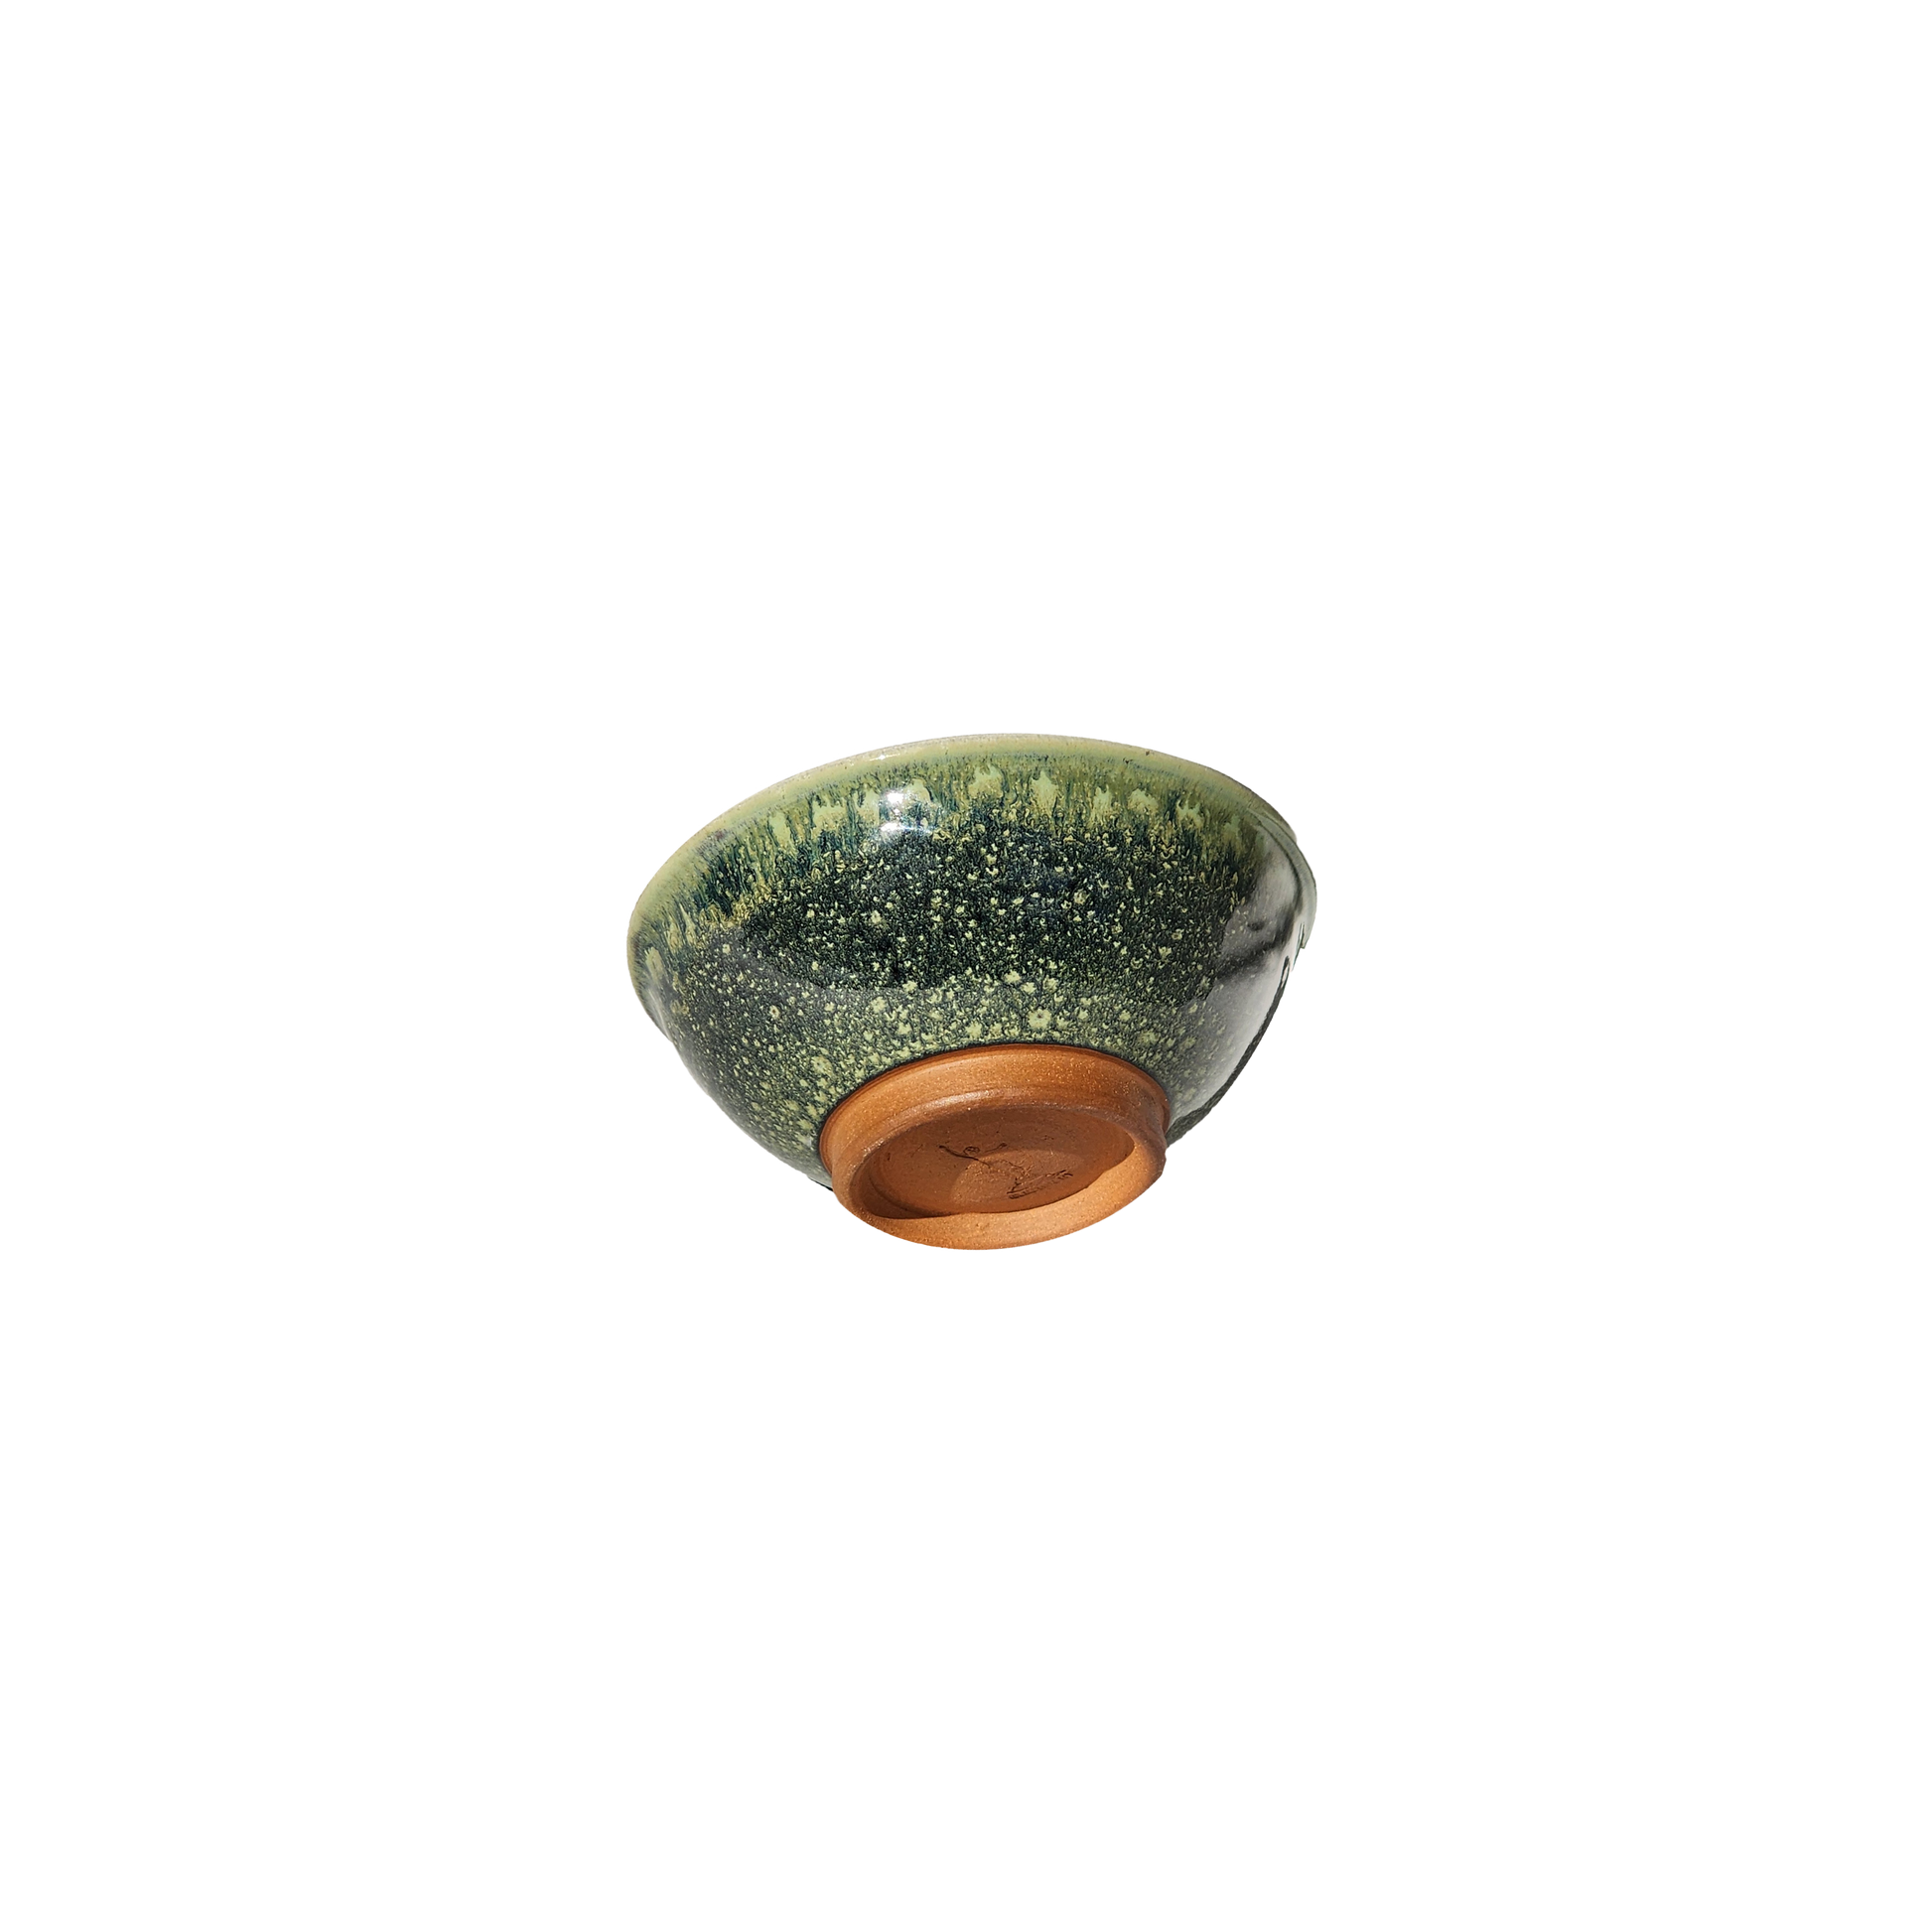 Image: A ceramic bowl in "Froggy Bottom" glaze, evoking lush green ponds and foliage. Sized at 1 cup, its smooth surface and curved edges offer practicality and charm. Ideal for snacks or condiments, it adds a touch of nature-inspired style to any table.